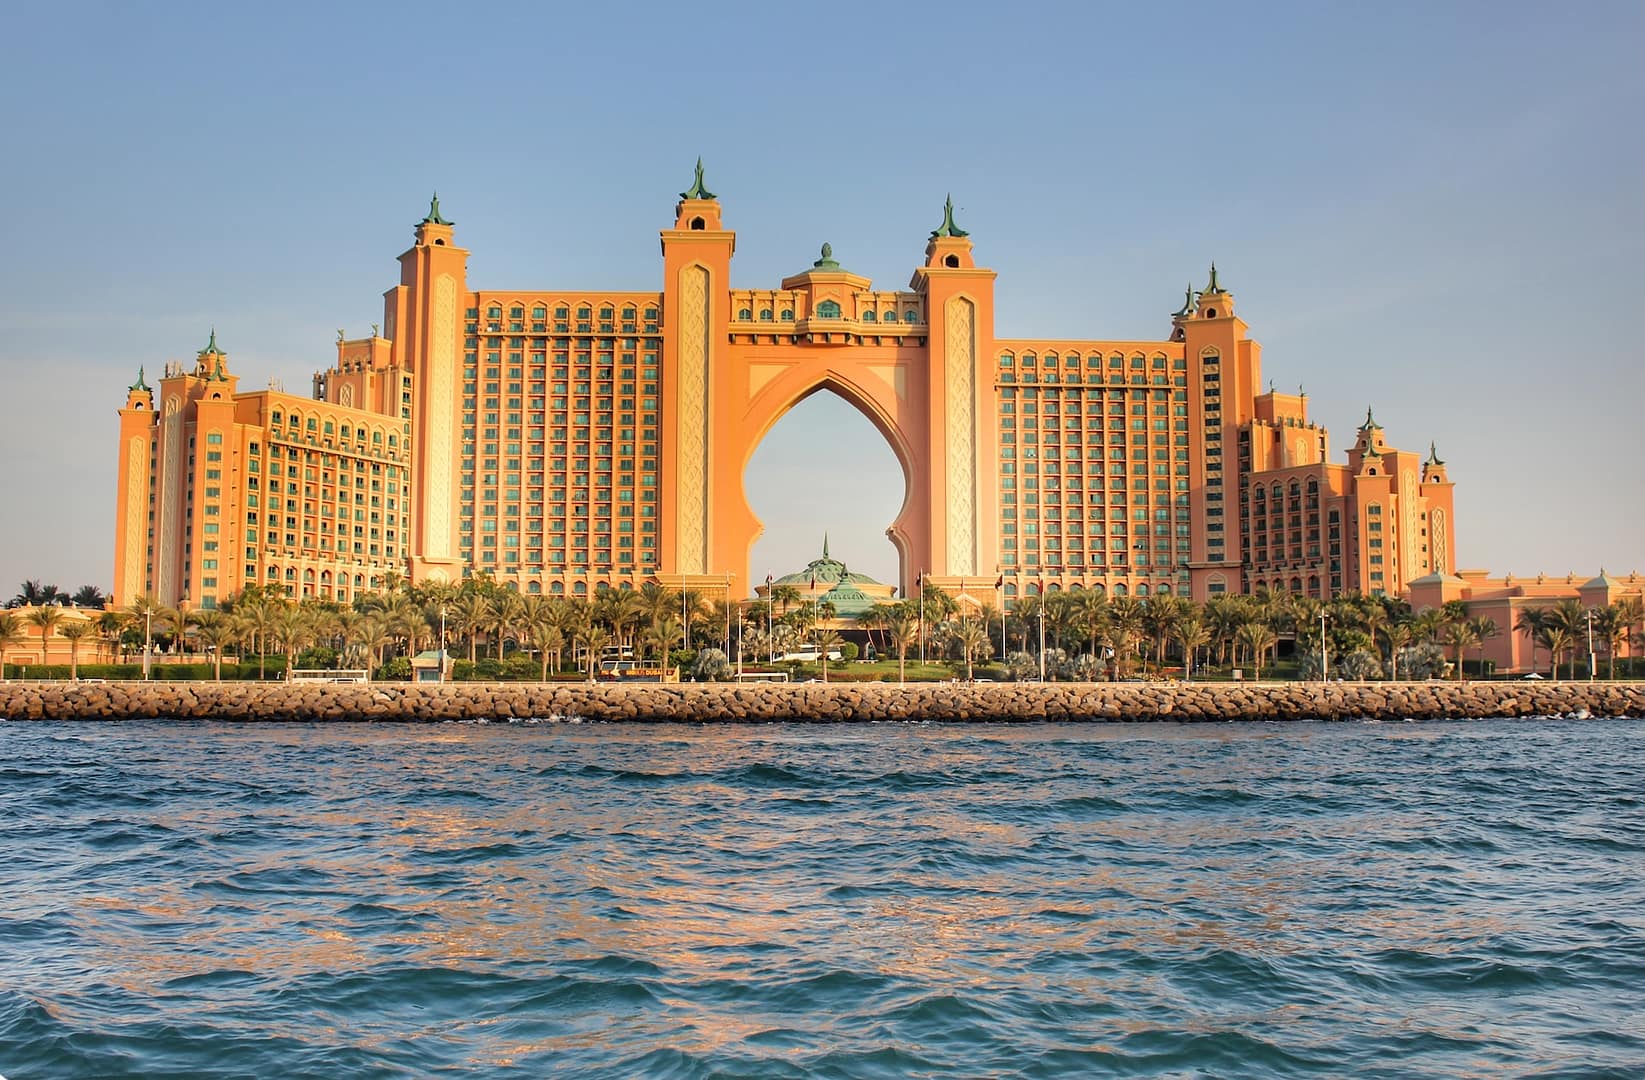 dubai is a city of 5 stars hotels - crazy facts curiousities